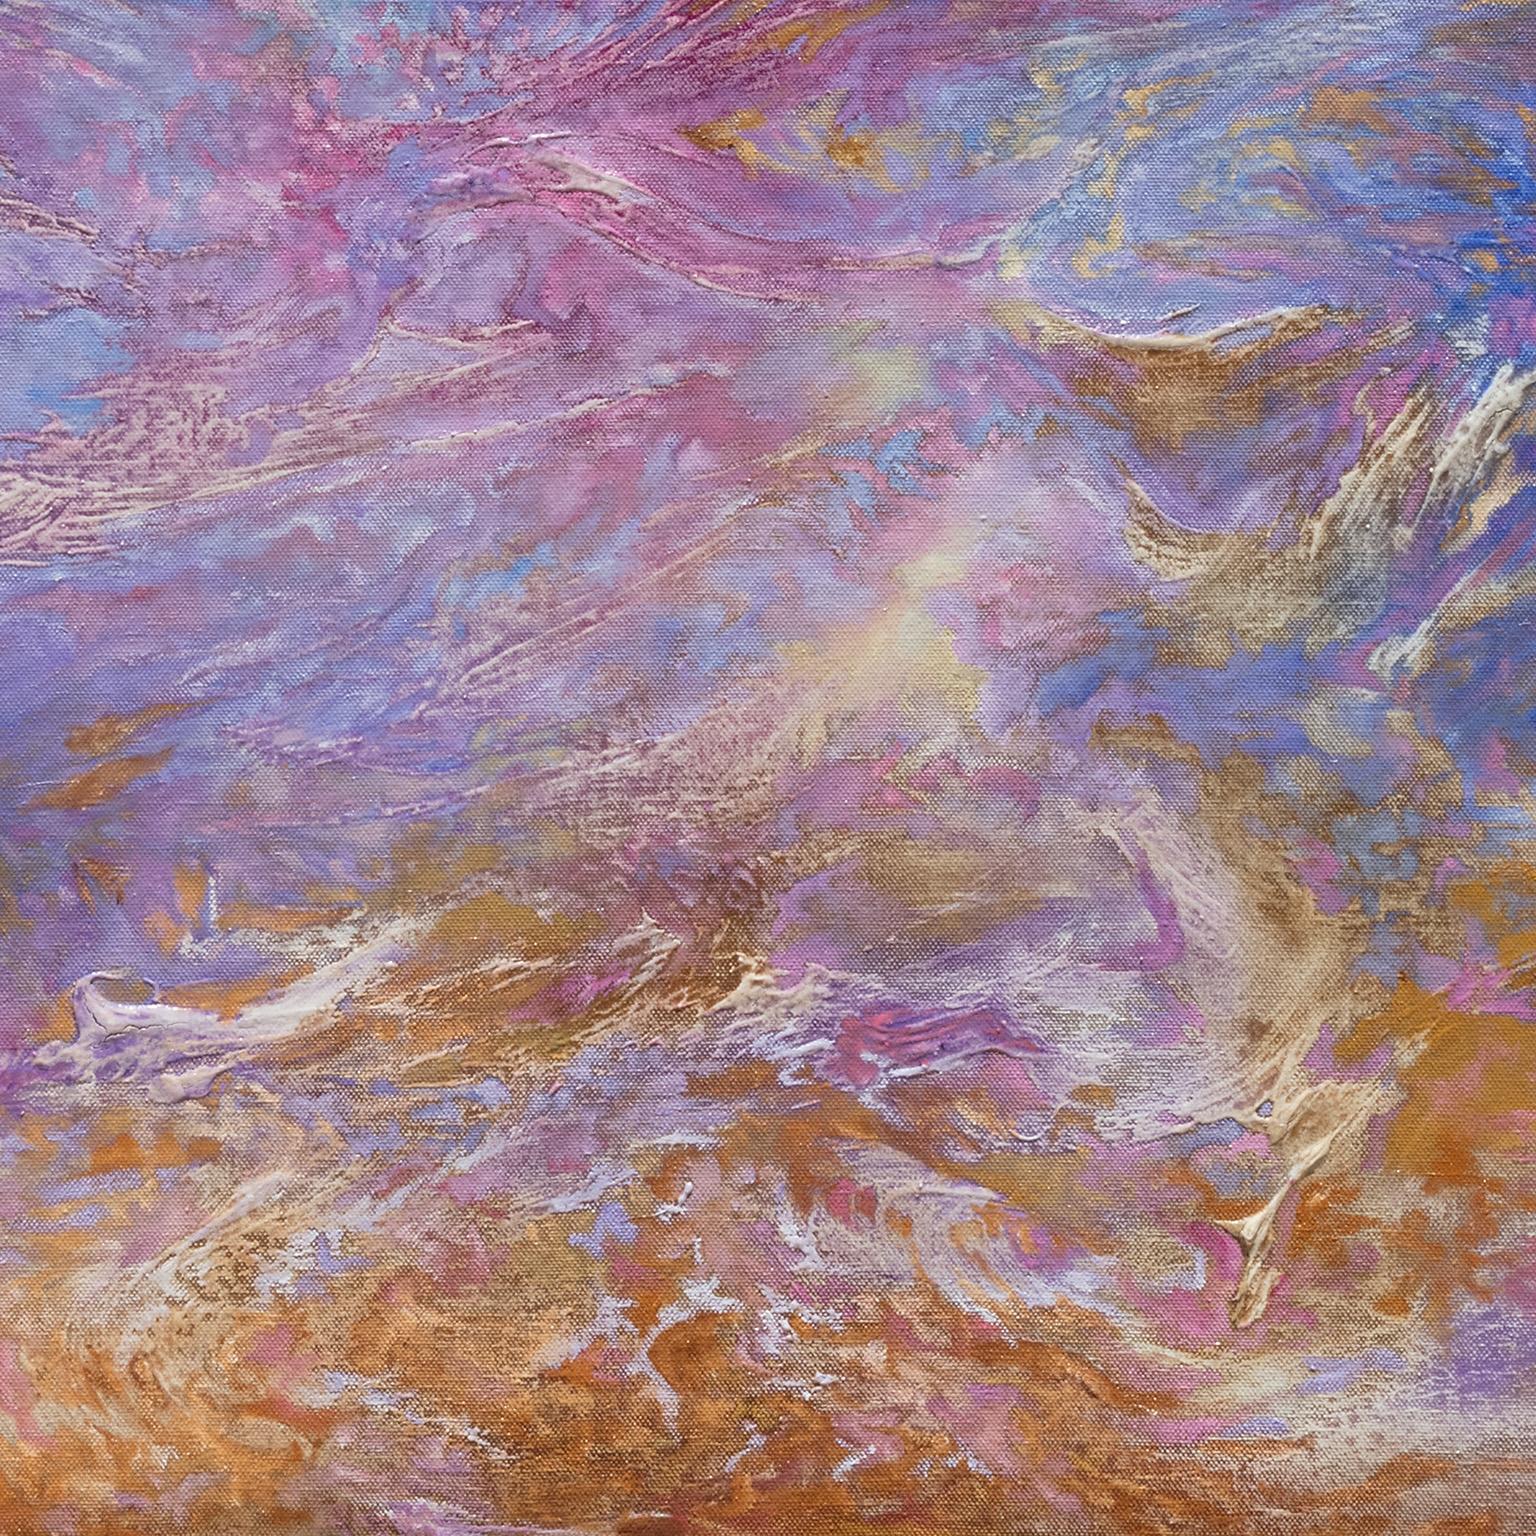 Ruggero Vanni's Ver Vernat (Spring Swirls) is a 62 x 84-inch abstract gestural oil painting. It is an abstract landscape of vigorous brushstrokes and light, with a  luminous central focus. The primary colors are purple and blue. There are explicit